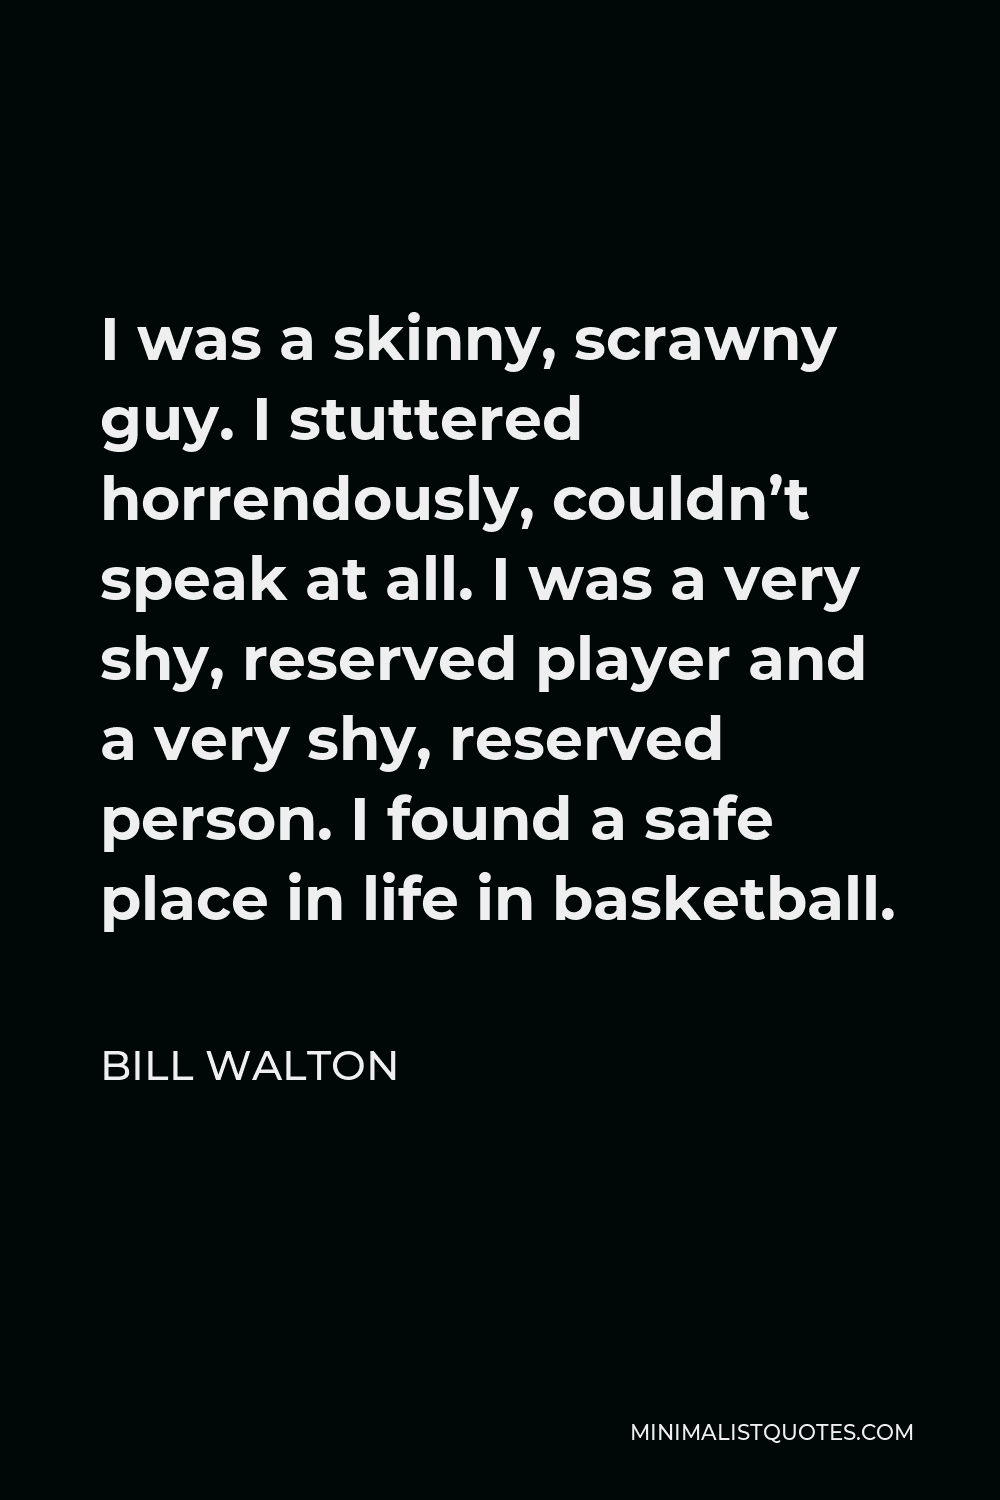 Bill Walton Quote - I was a skinny, scrawny guy. I stuttered horrendously, couldn’t speak at all. I was a very shy, reserved player and a very shy, reserved person. I found a safe place in life in basketball.